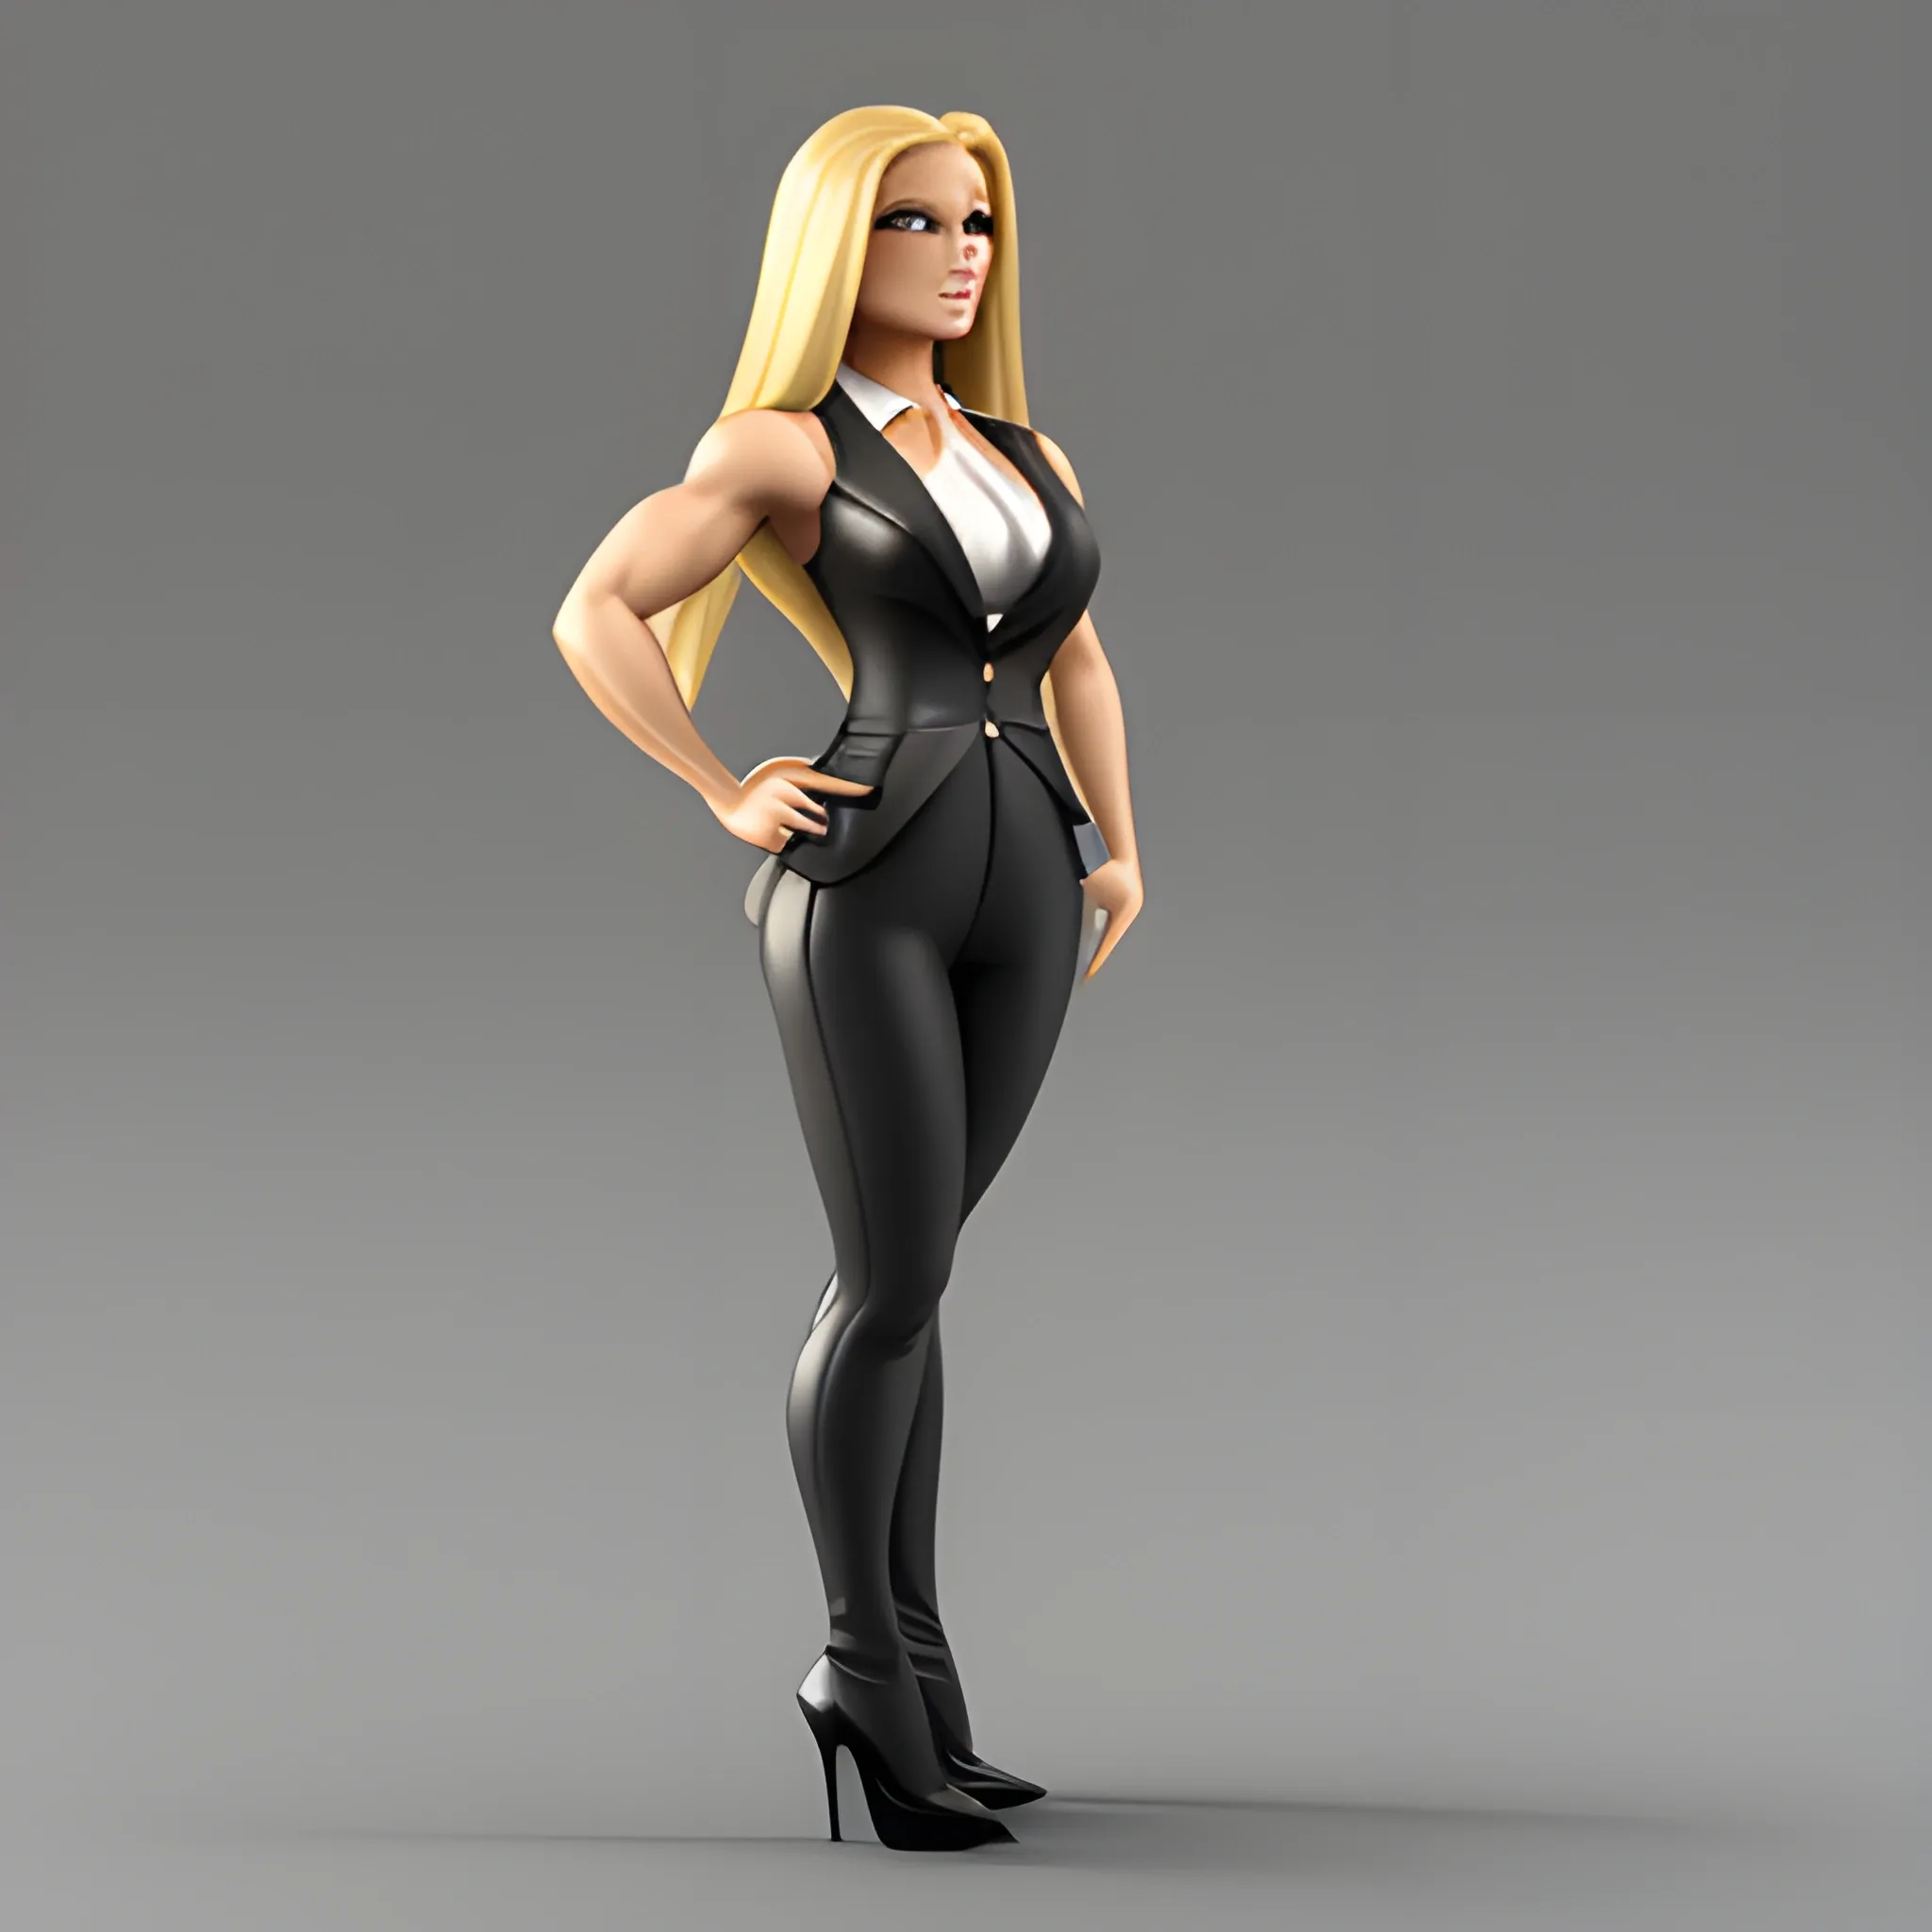 Slightly muscular, very long and thick blonde hair, dramatic hourglass figure, five-foot five-inches tall, wearing high-heels, flattering business suit, 3D